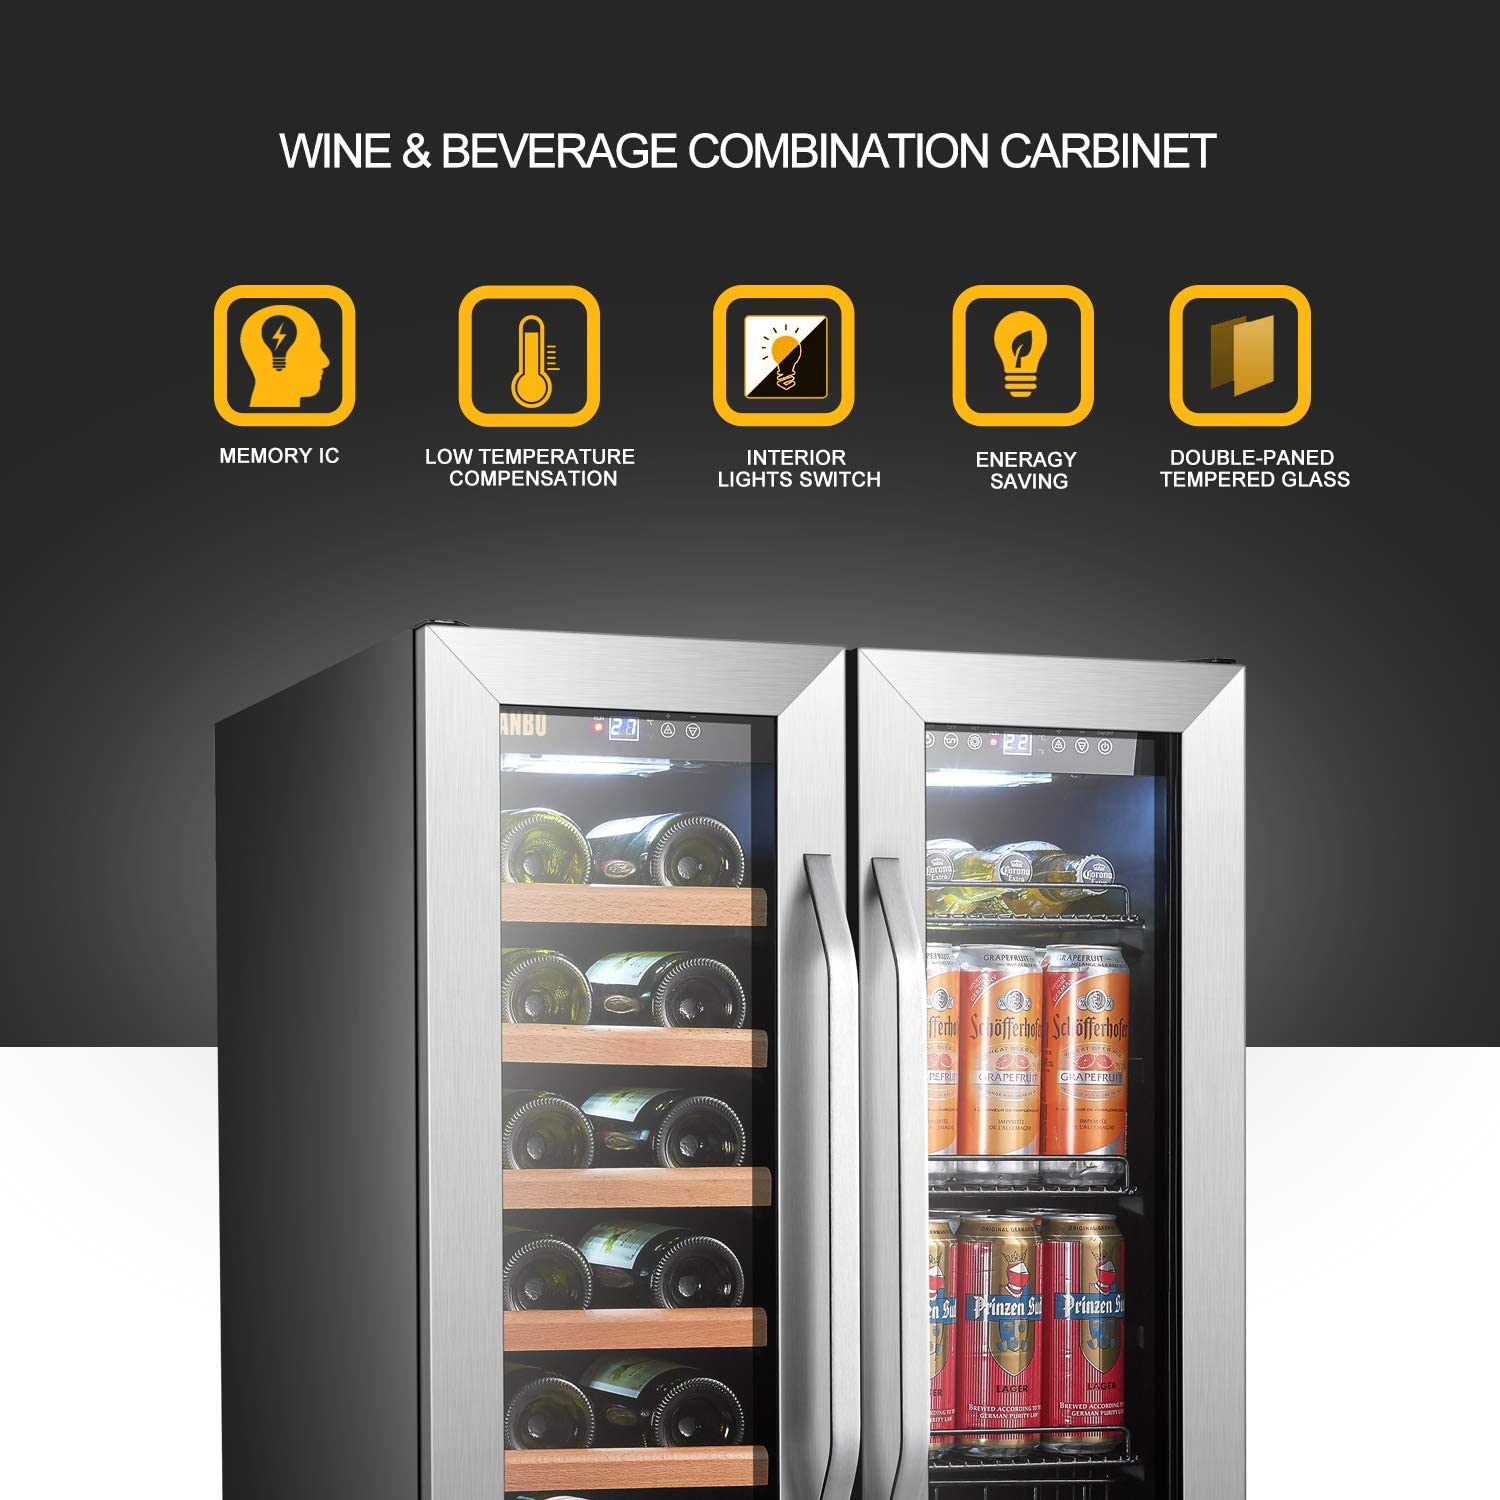 10 Best Dual Zone Wine Cooler Reviews: French Door Wine Cooler Fridge/ Cellars Under $300, $500, $1000 All In One Cooling Gear Lab: Any Refrigerators Air Conditioners Freezers Ice Makers Coolers Fans Reviewed And Compared.